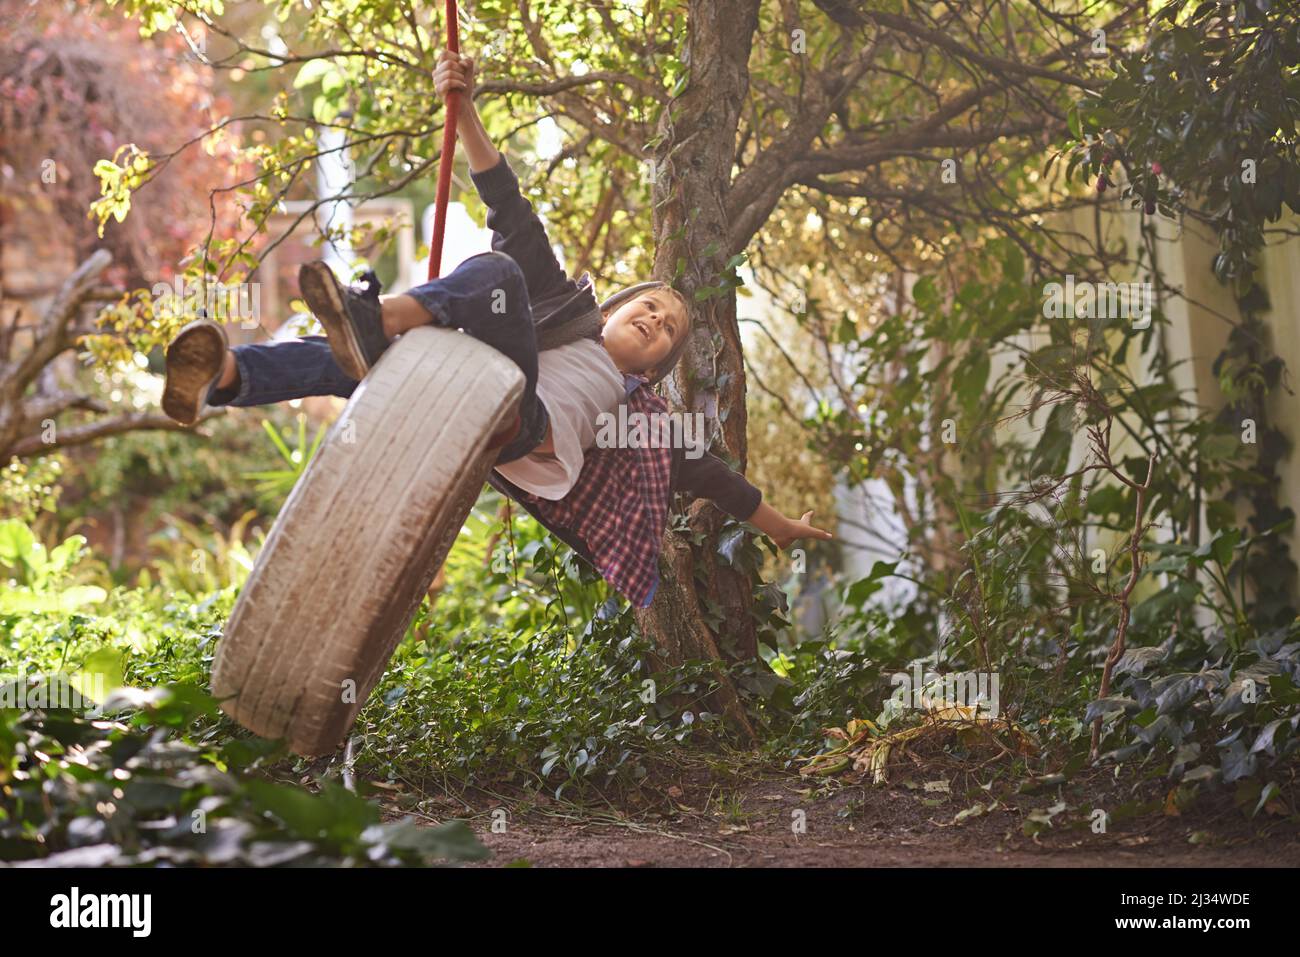 Carefree summer days of an idyllic childhood. A preteen boy swinging on a tyre swing in the garden. Stock Photo